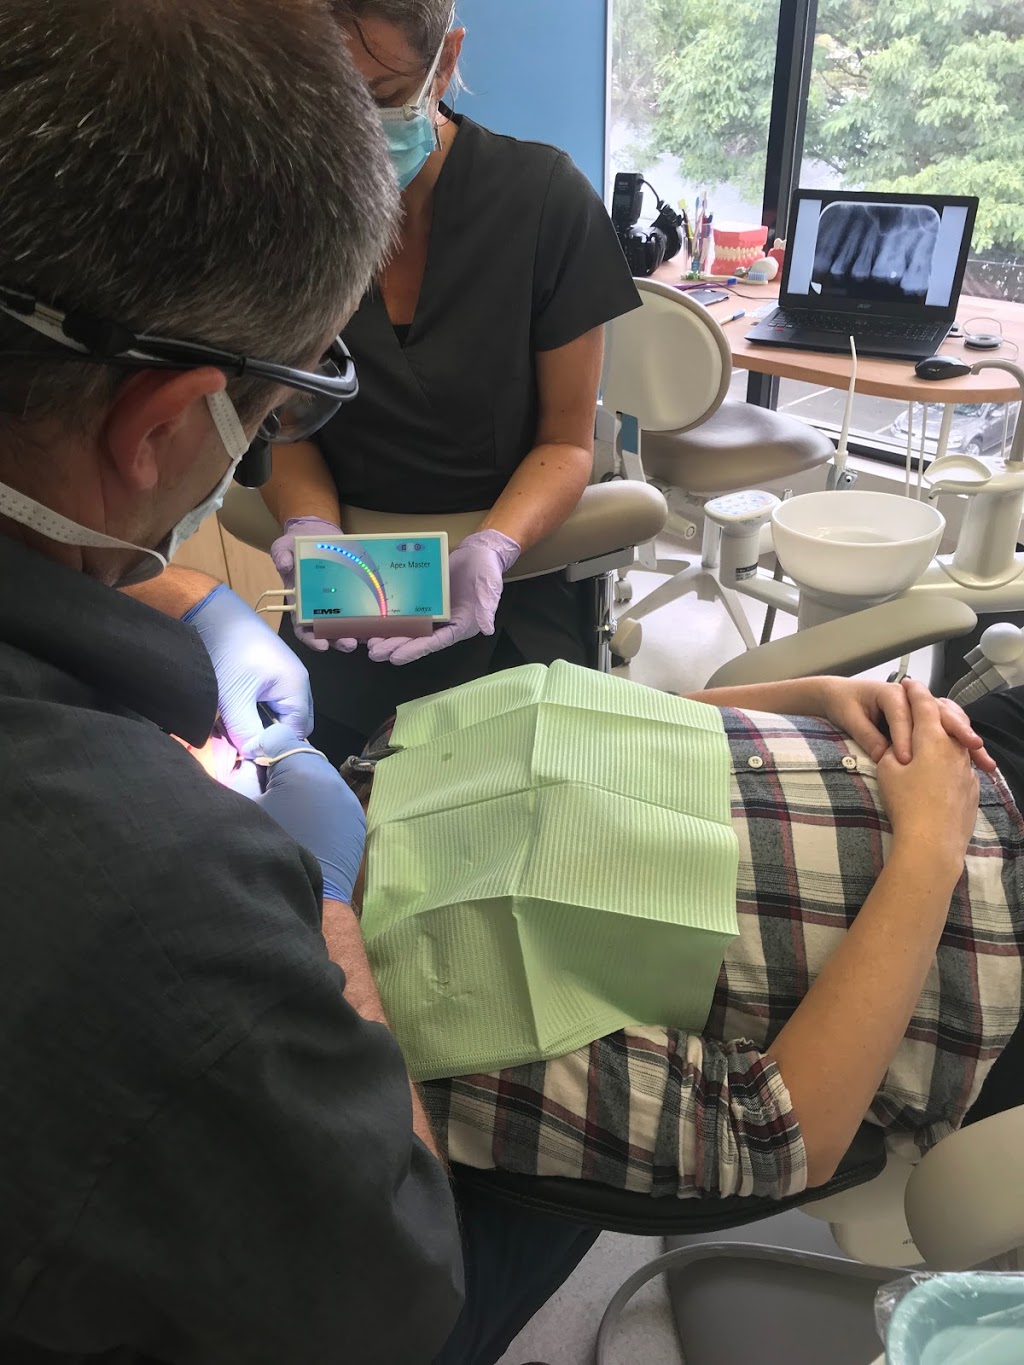 Dr Timothy OConnell-Maritz (The Family Dental Caboolture) | Lakes Centre, Suite 28/8-22 King St, Caboolture QLD 4510, Australia | Phone: (07) 5428 2277